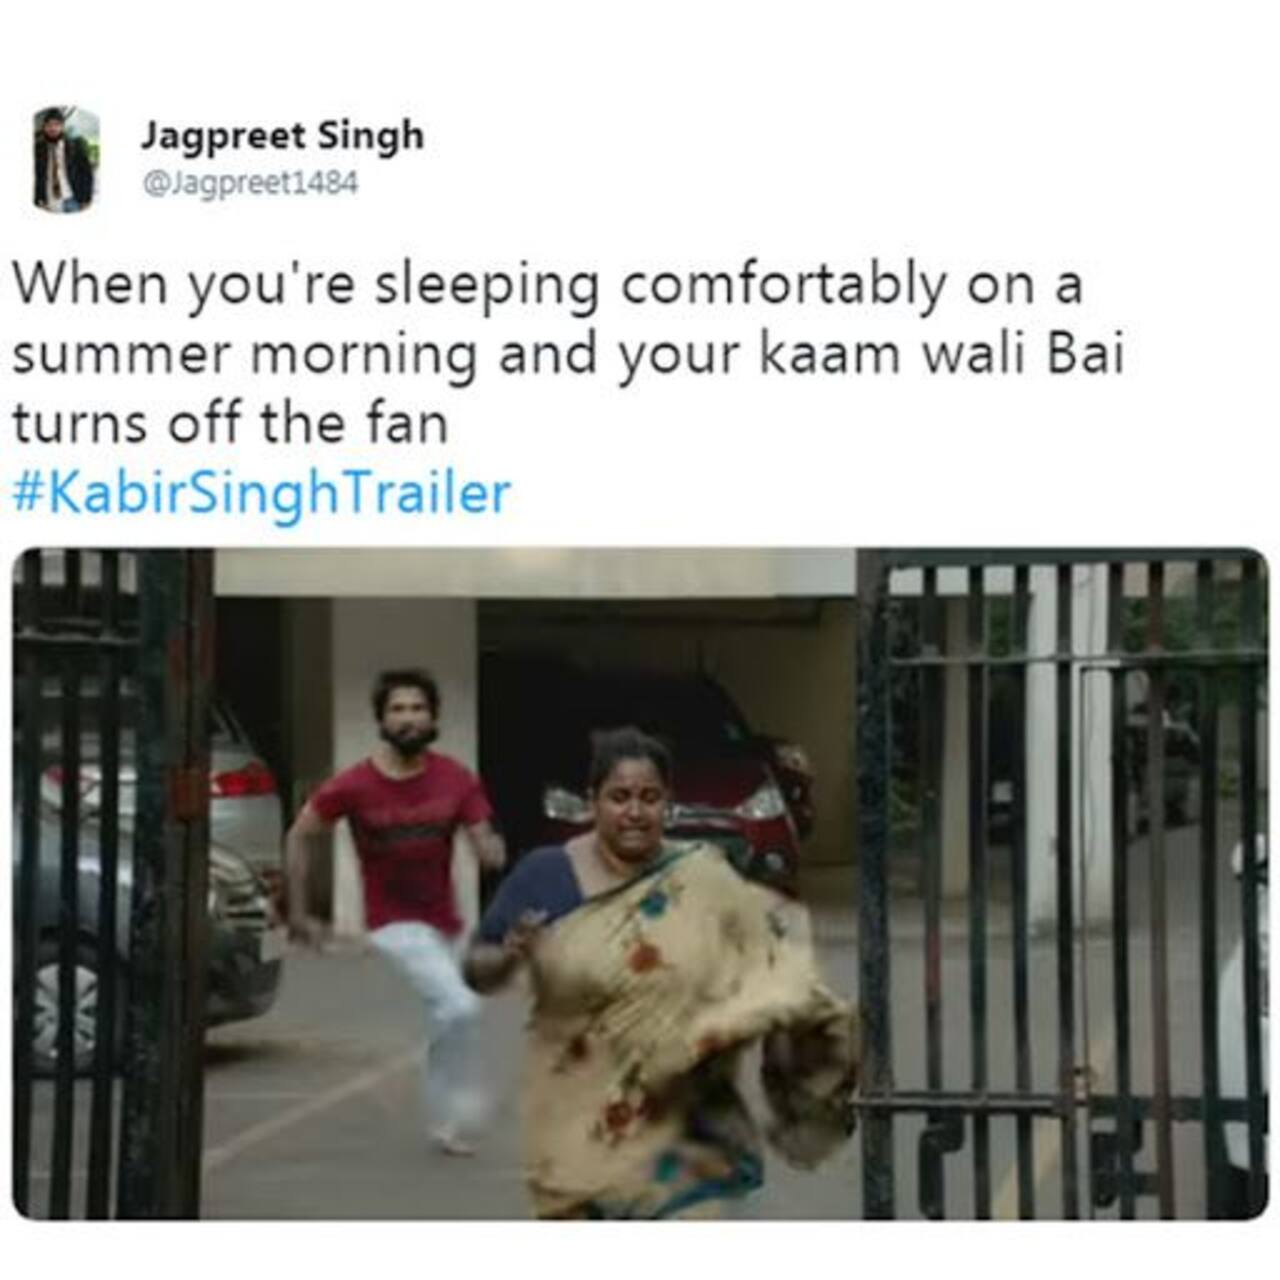 You will relate to THESE memes from Shahid Kapoor and Kiara Advani starrer  Kabir Singh trailer - Bollywood News & Gossip, Movie Reviews, Trailers &  Videos at 